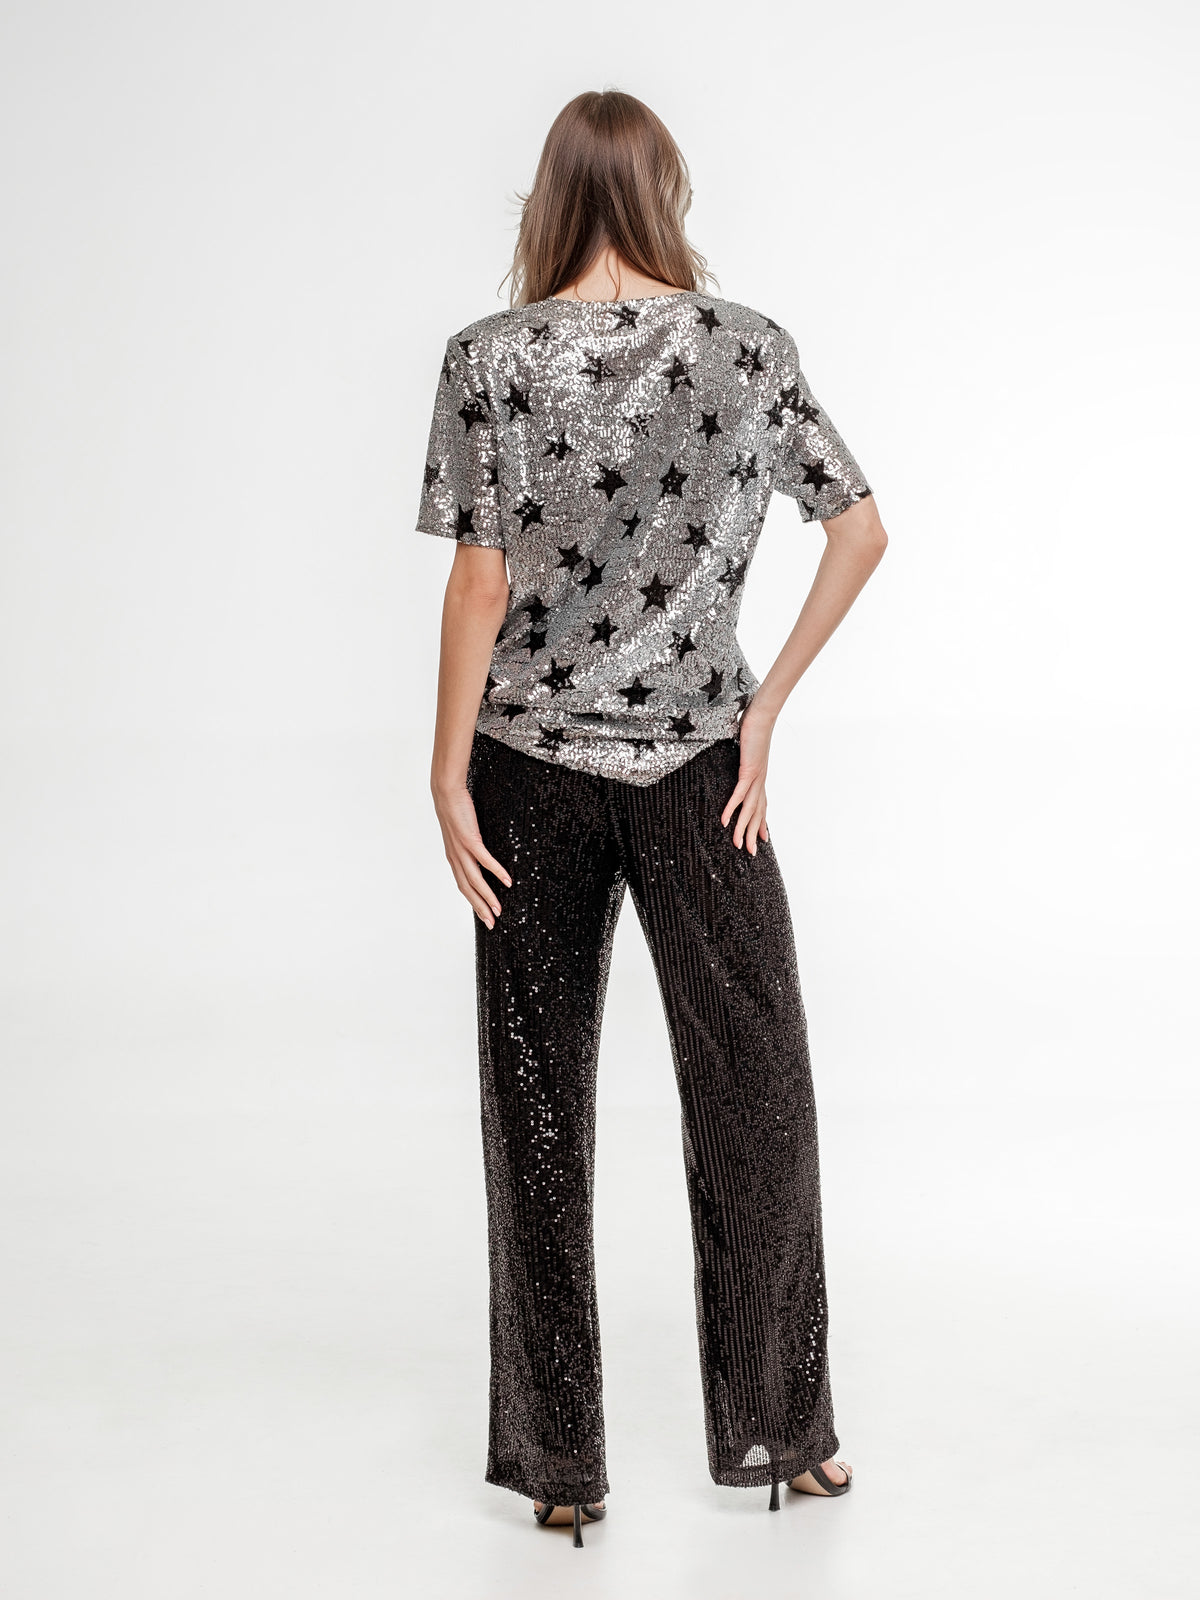 silver glitter top with stars and black glitter wide pants occasion wear back view